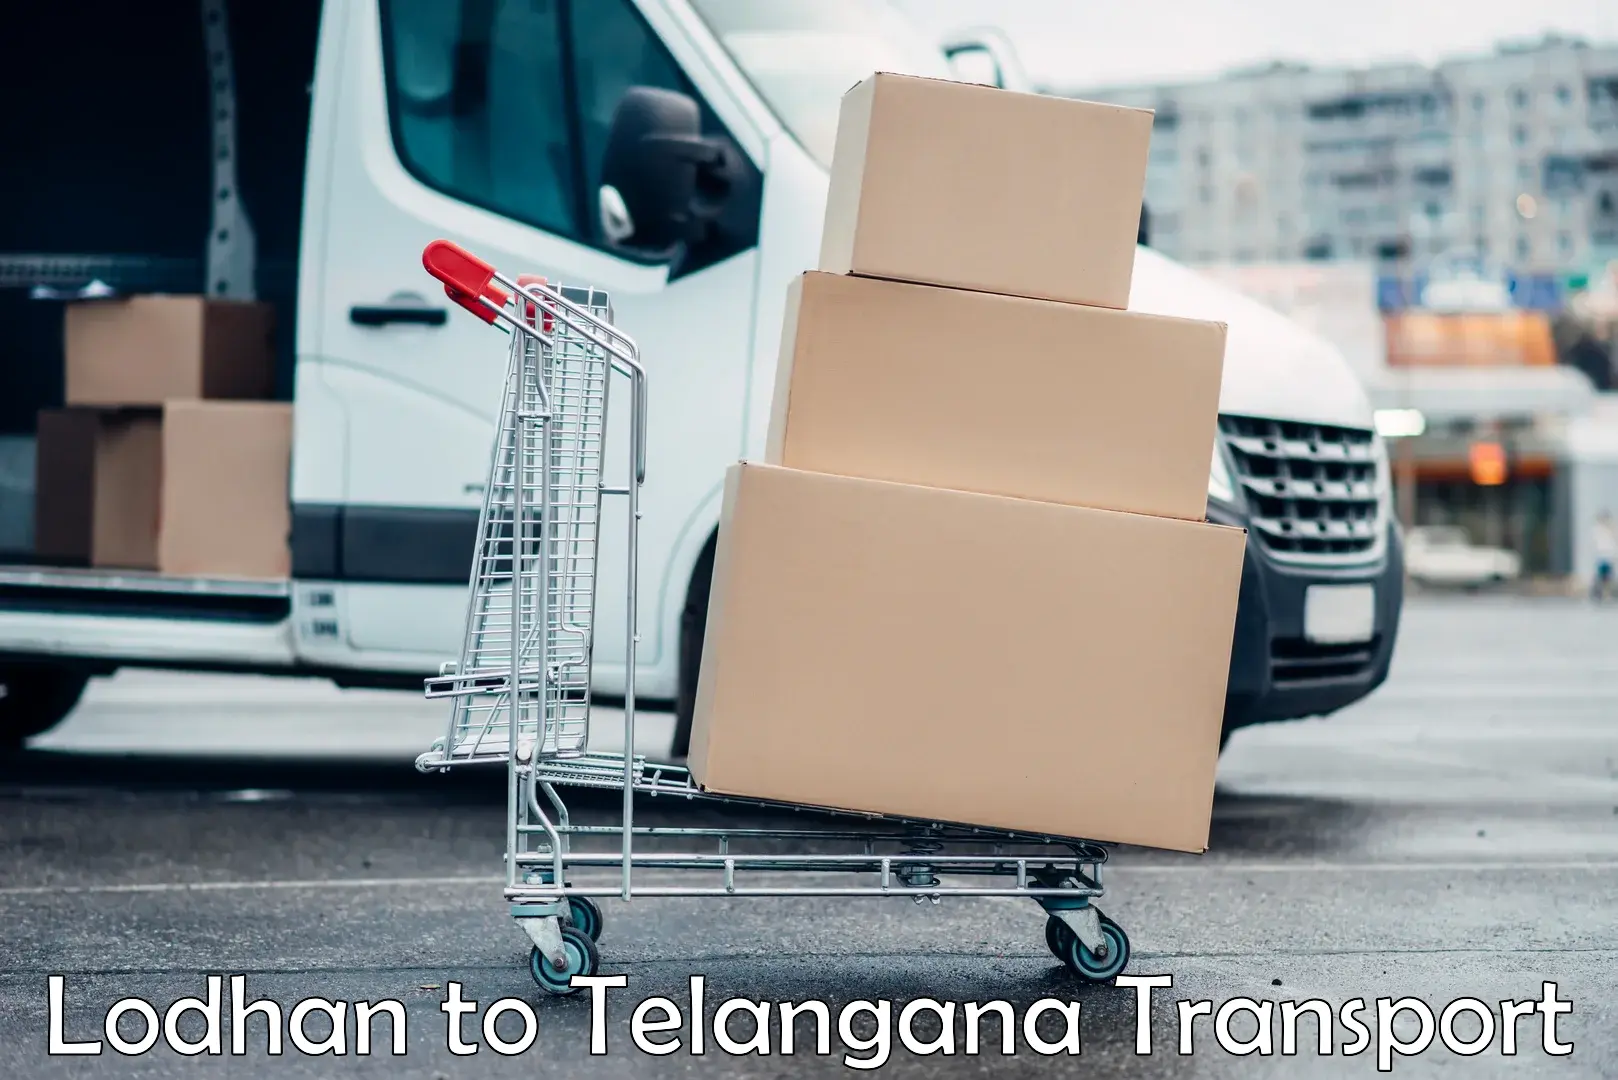 Pick up transport service Lodhan to Manneguda